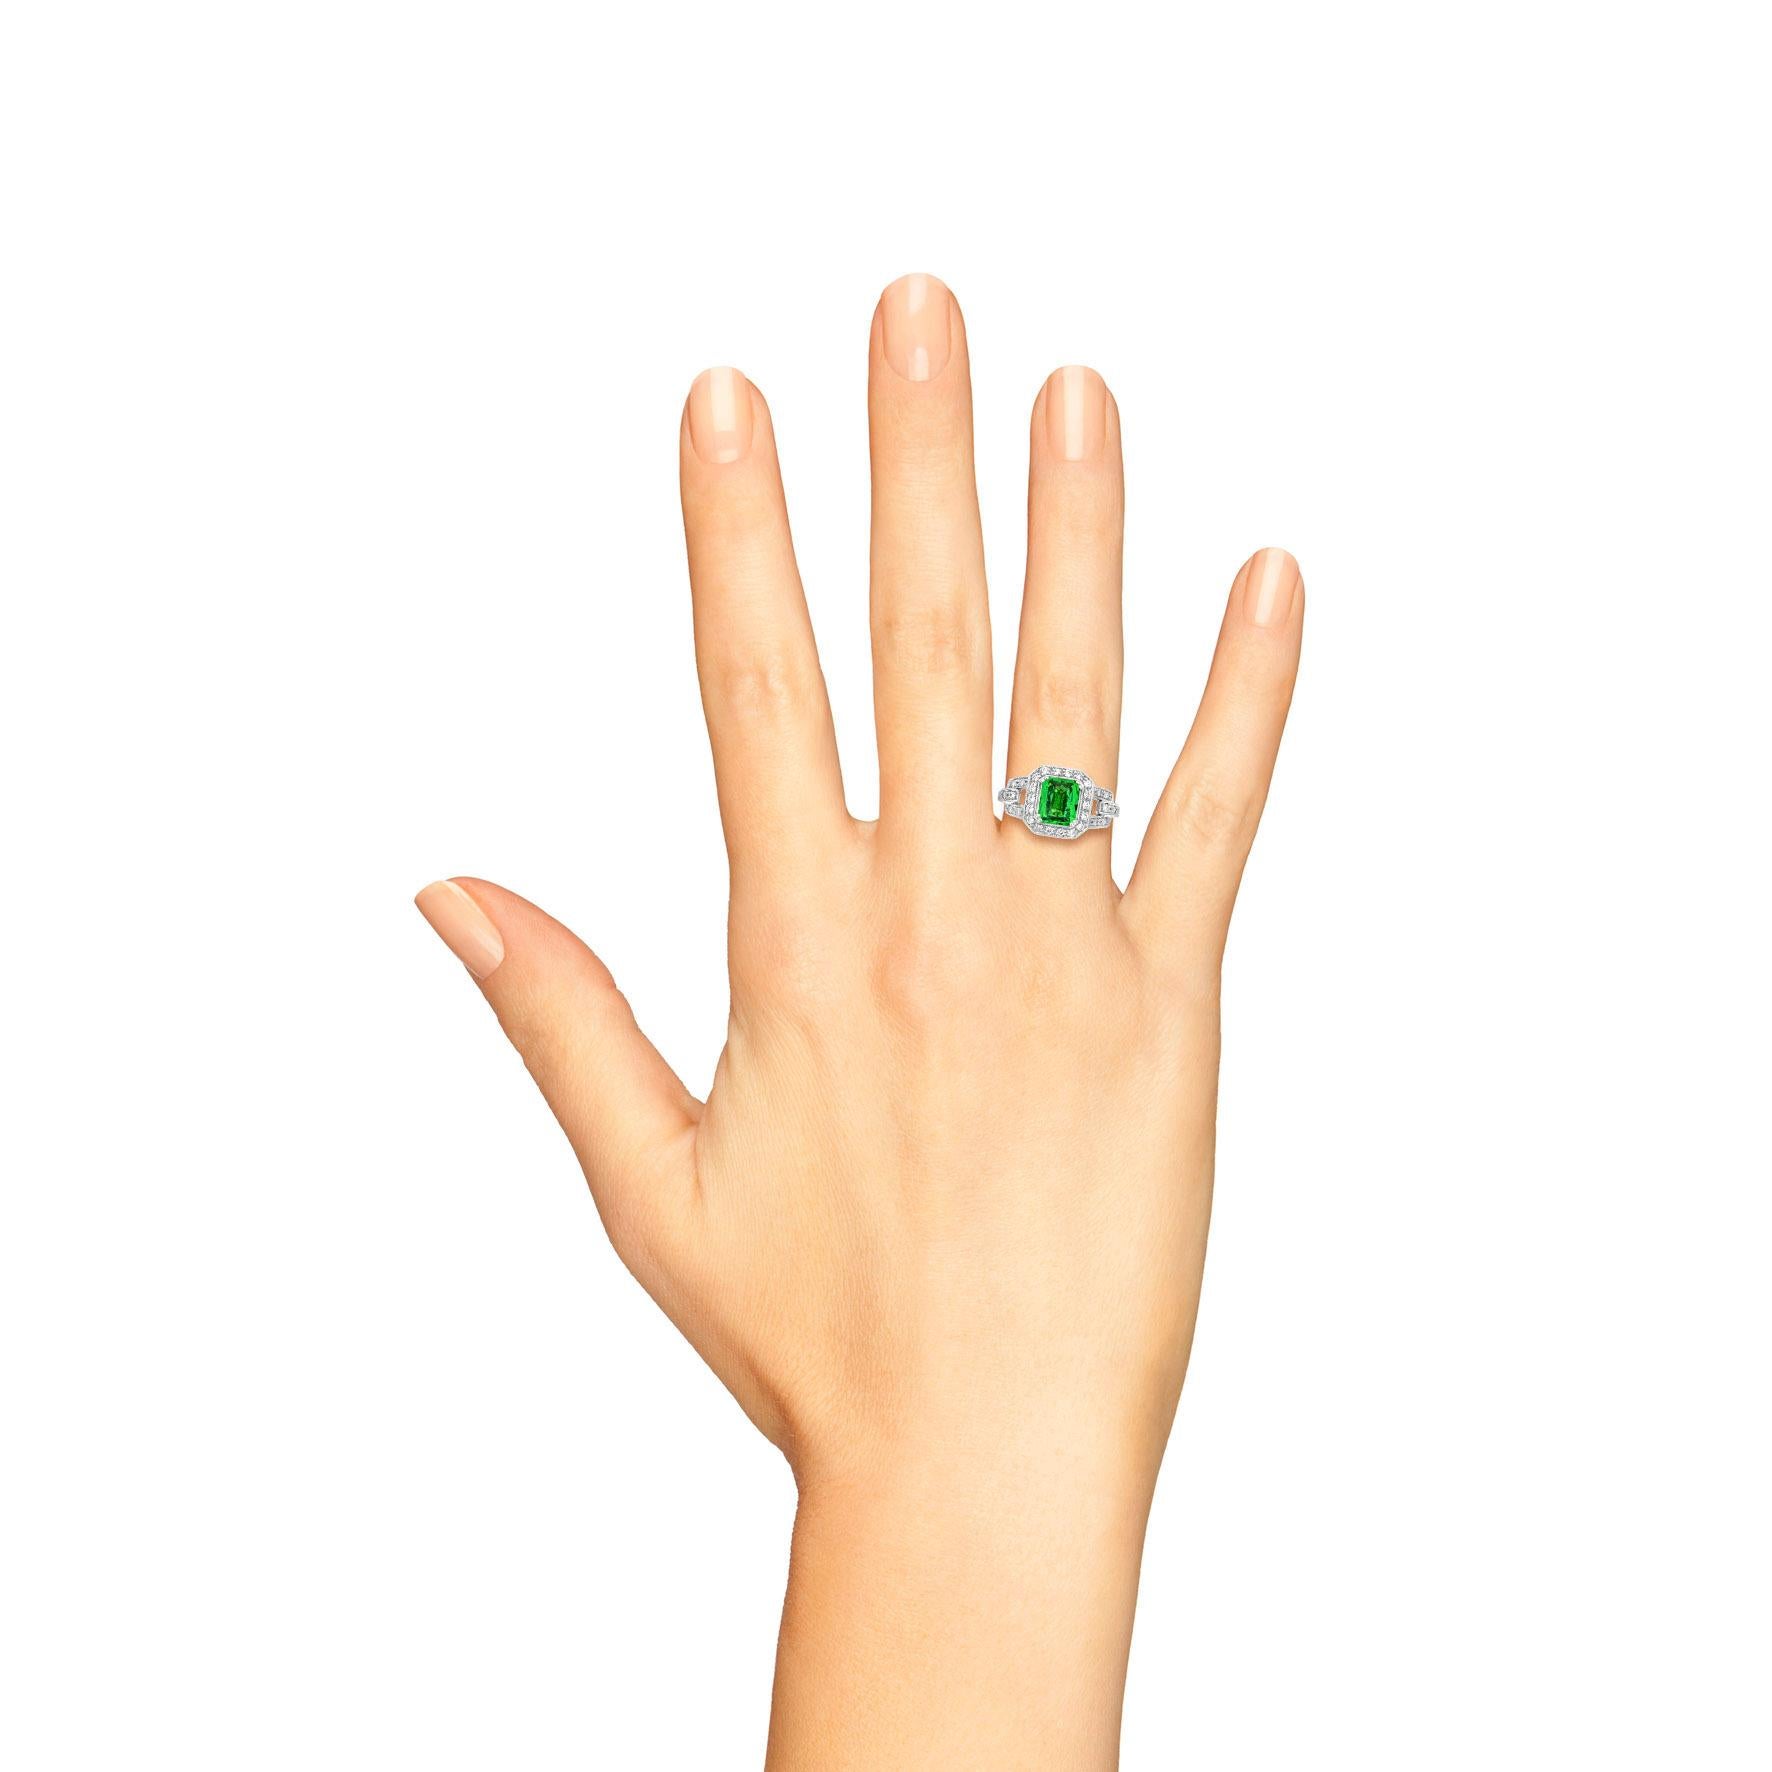 The charming tsavorite engagement ring. This Art Deco inspired makes for a dynamic cocktail ring or statement piece. Centered by a 3 carat emerald cut of a lush, vivid green tsavorite. Smartly set accent and shoulders by 36 round sparkling diamonds.